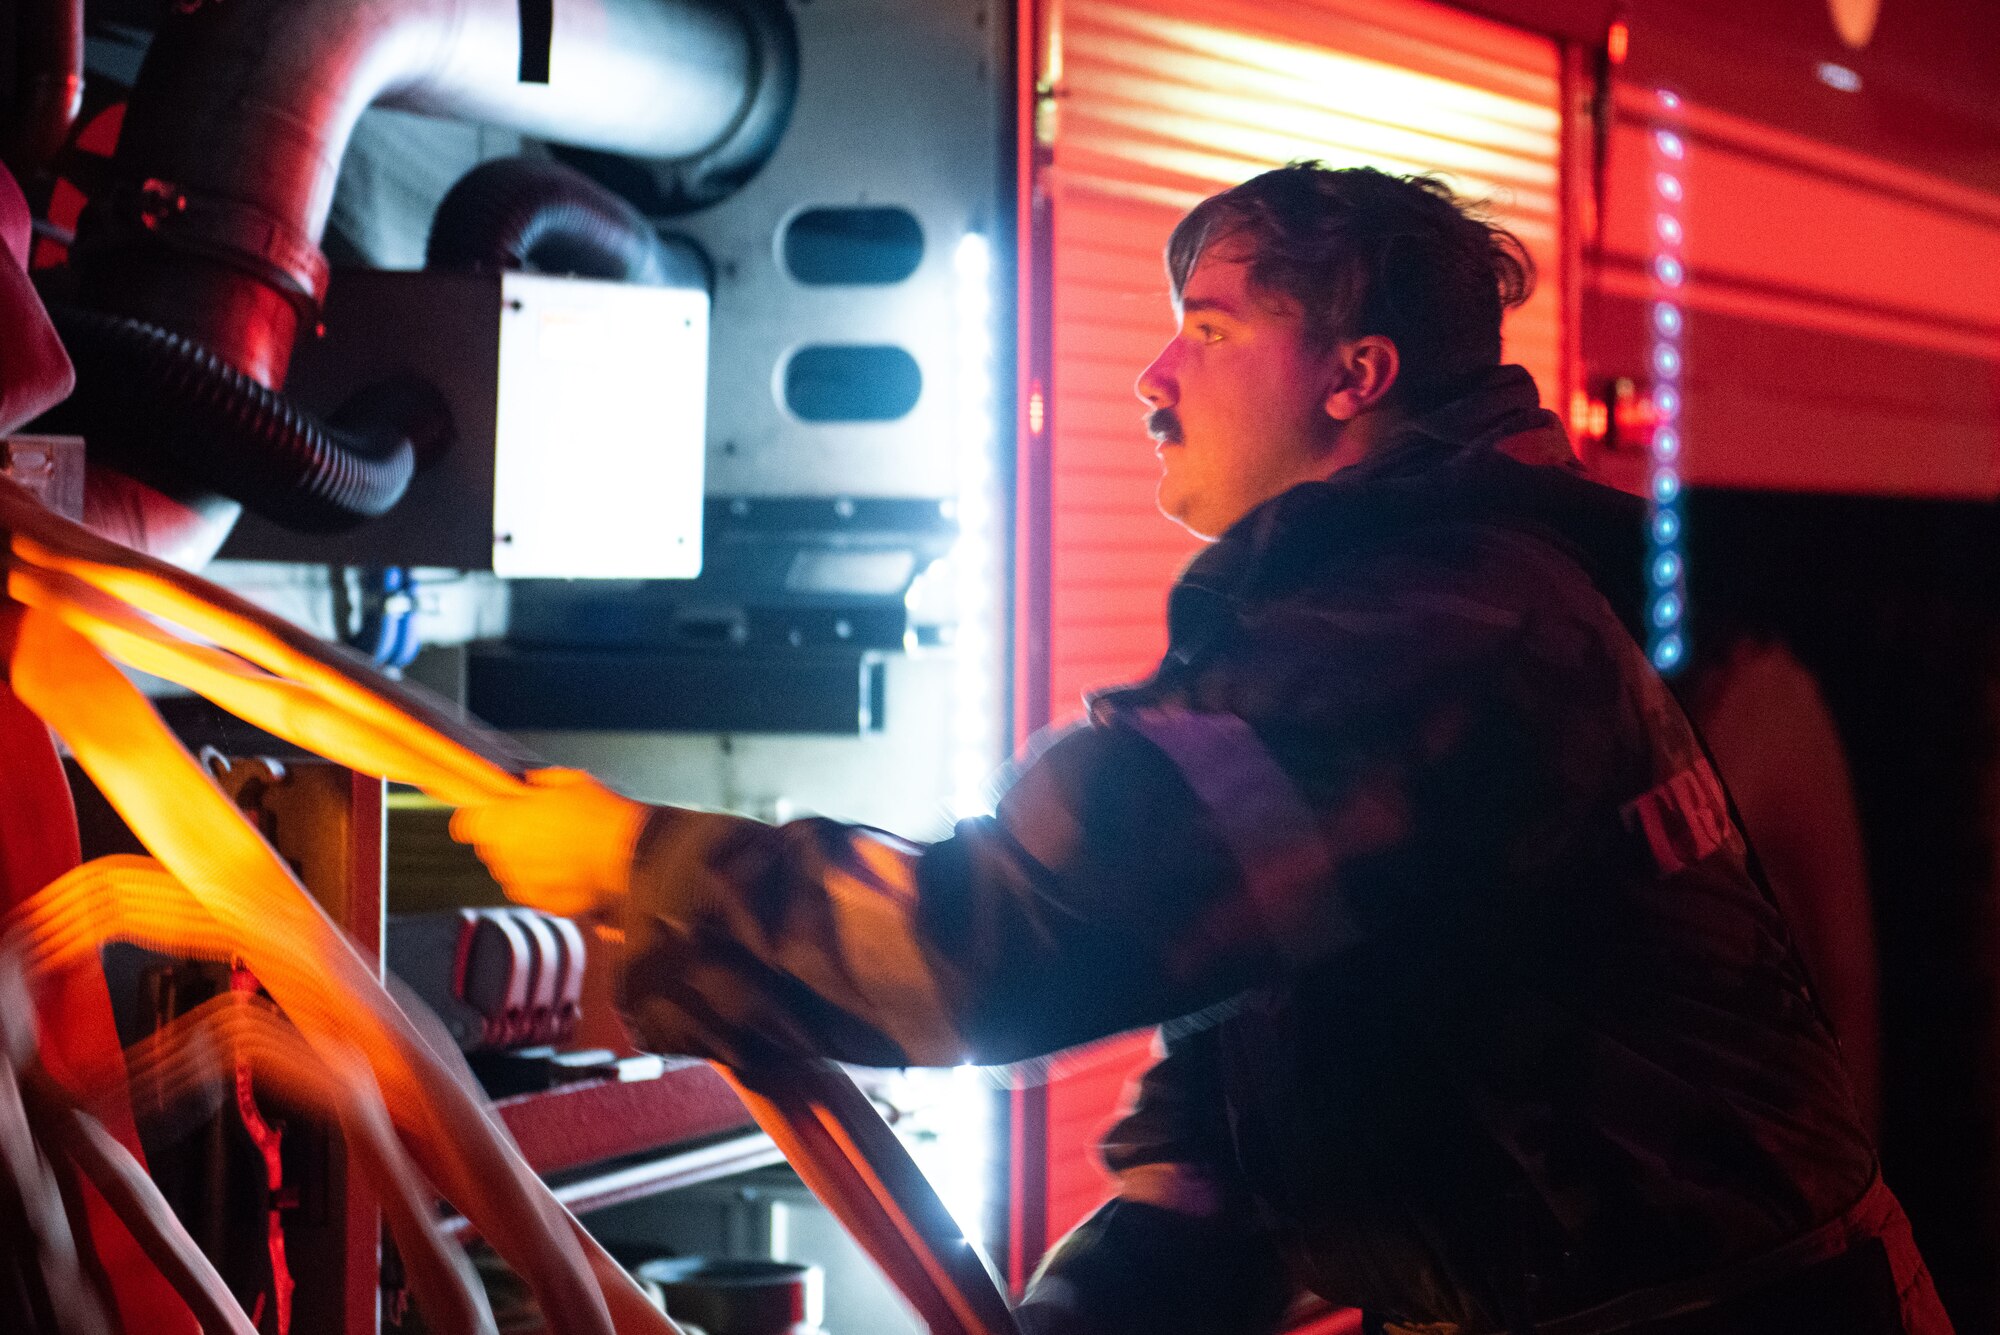 U.S. Air Force Senior Airman Jacob Jenkins, 51st Civil Engineer Squadron (CES) fire station driver and operator, pulls a hose from a fire truck during a fire response scenario at Osan Air Base, Republic of Korea, Sept. 12, 2022, in support of a wing training event.